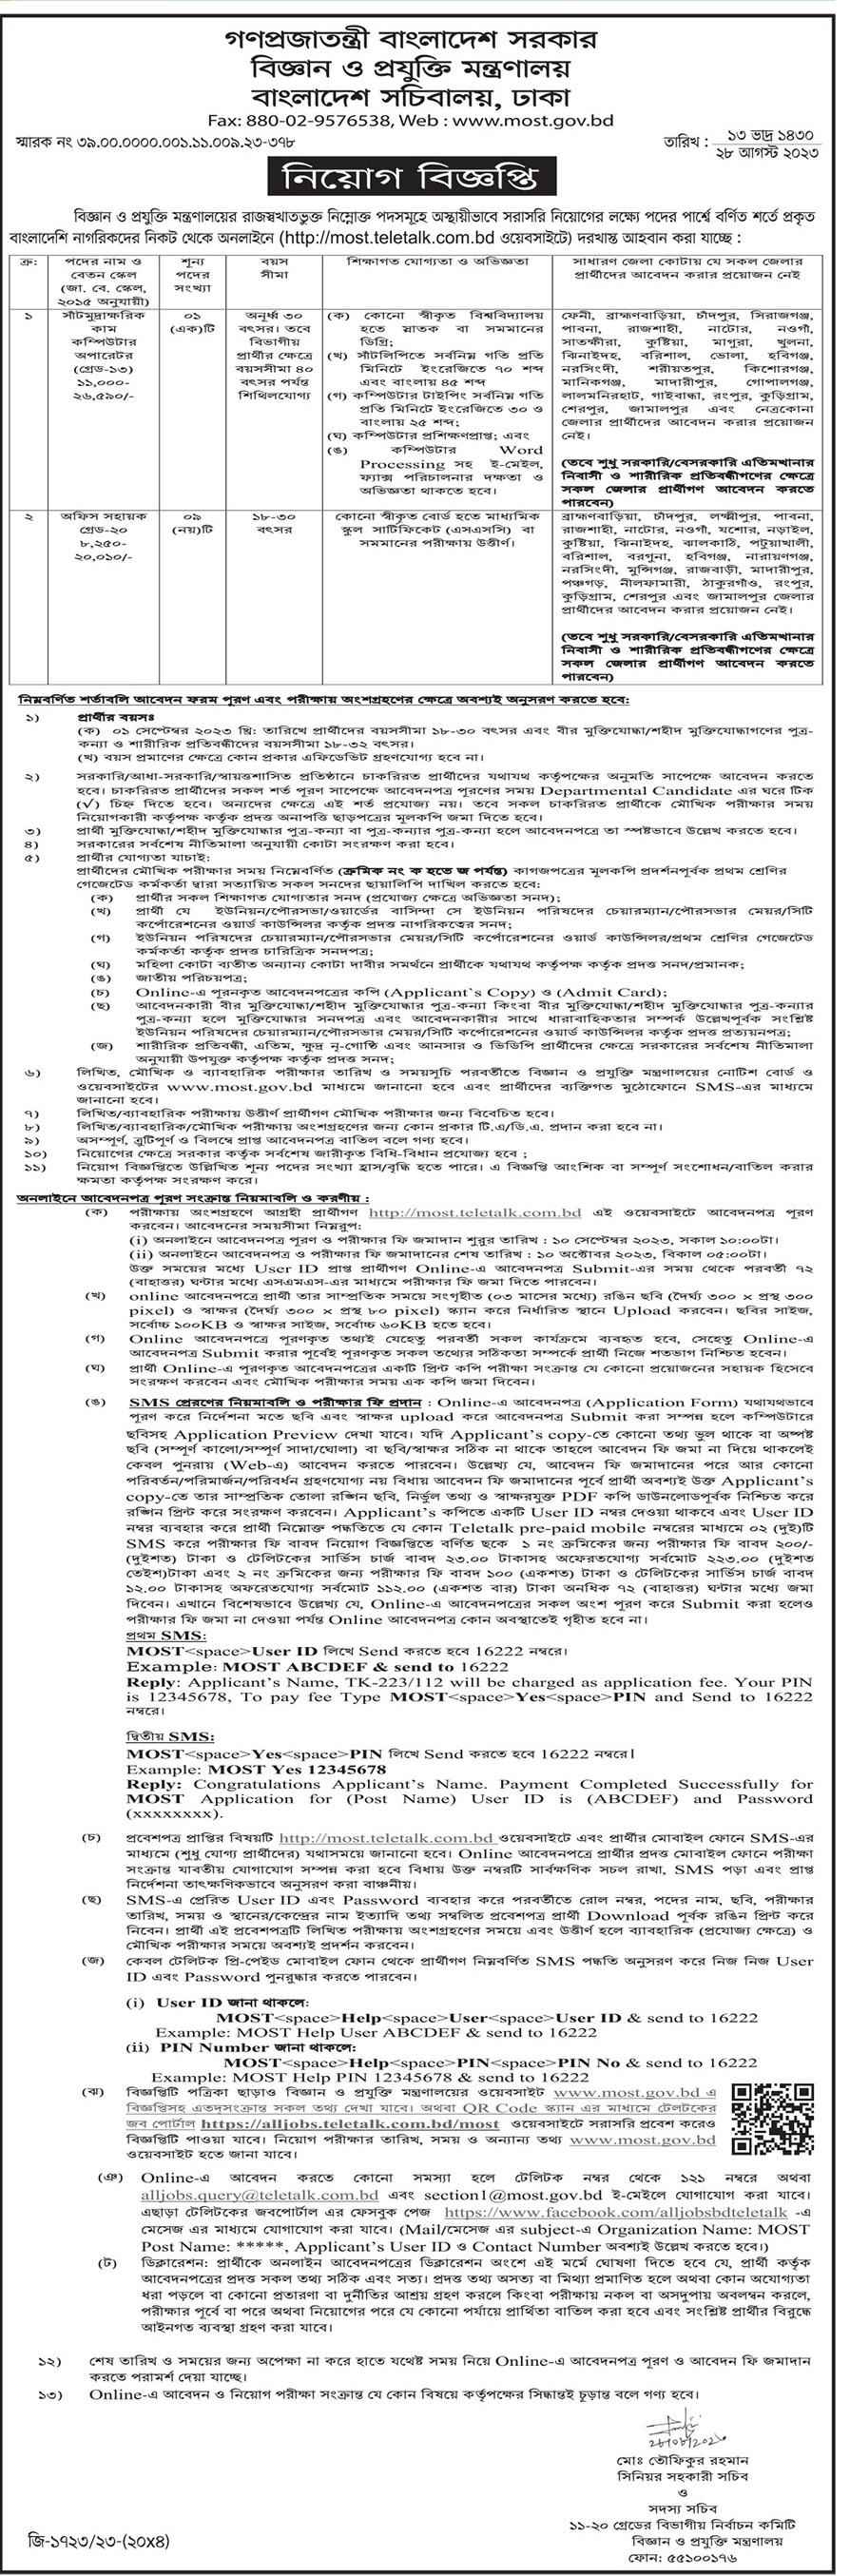 Ministry of Science and Technology Job Circular